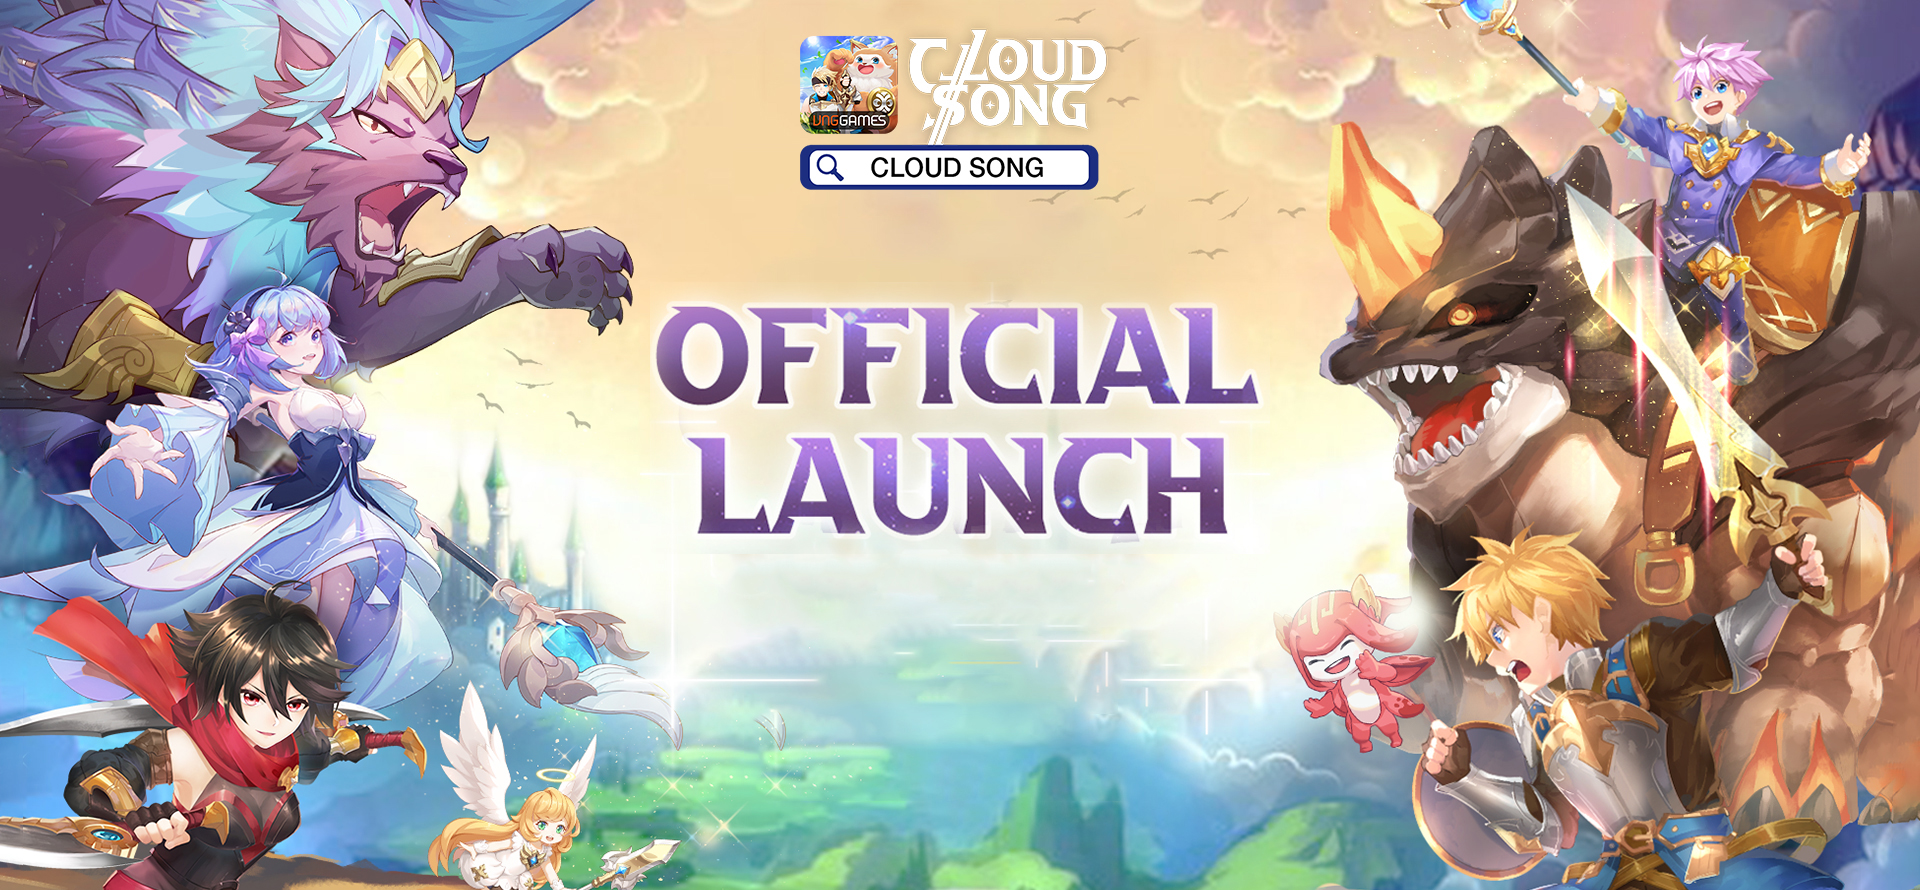 Cloud Song: Saga of Skywalkers - Mobile MMORPG hits No.1 spot of Free Games  on App Store & Google Play - MMO Culture